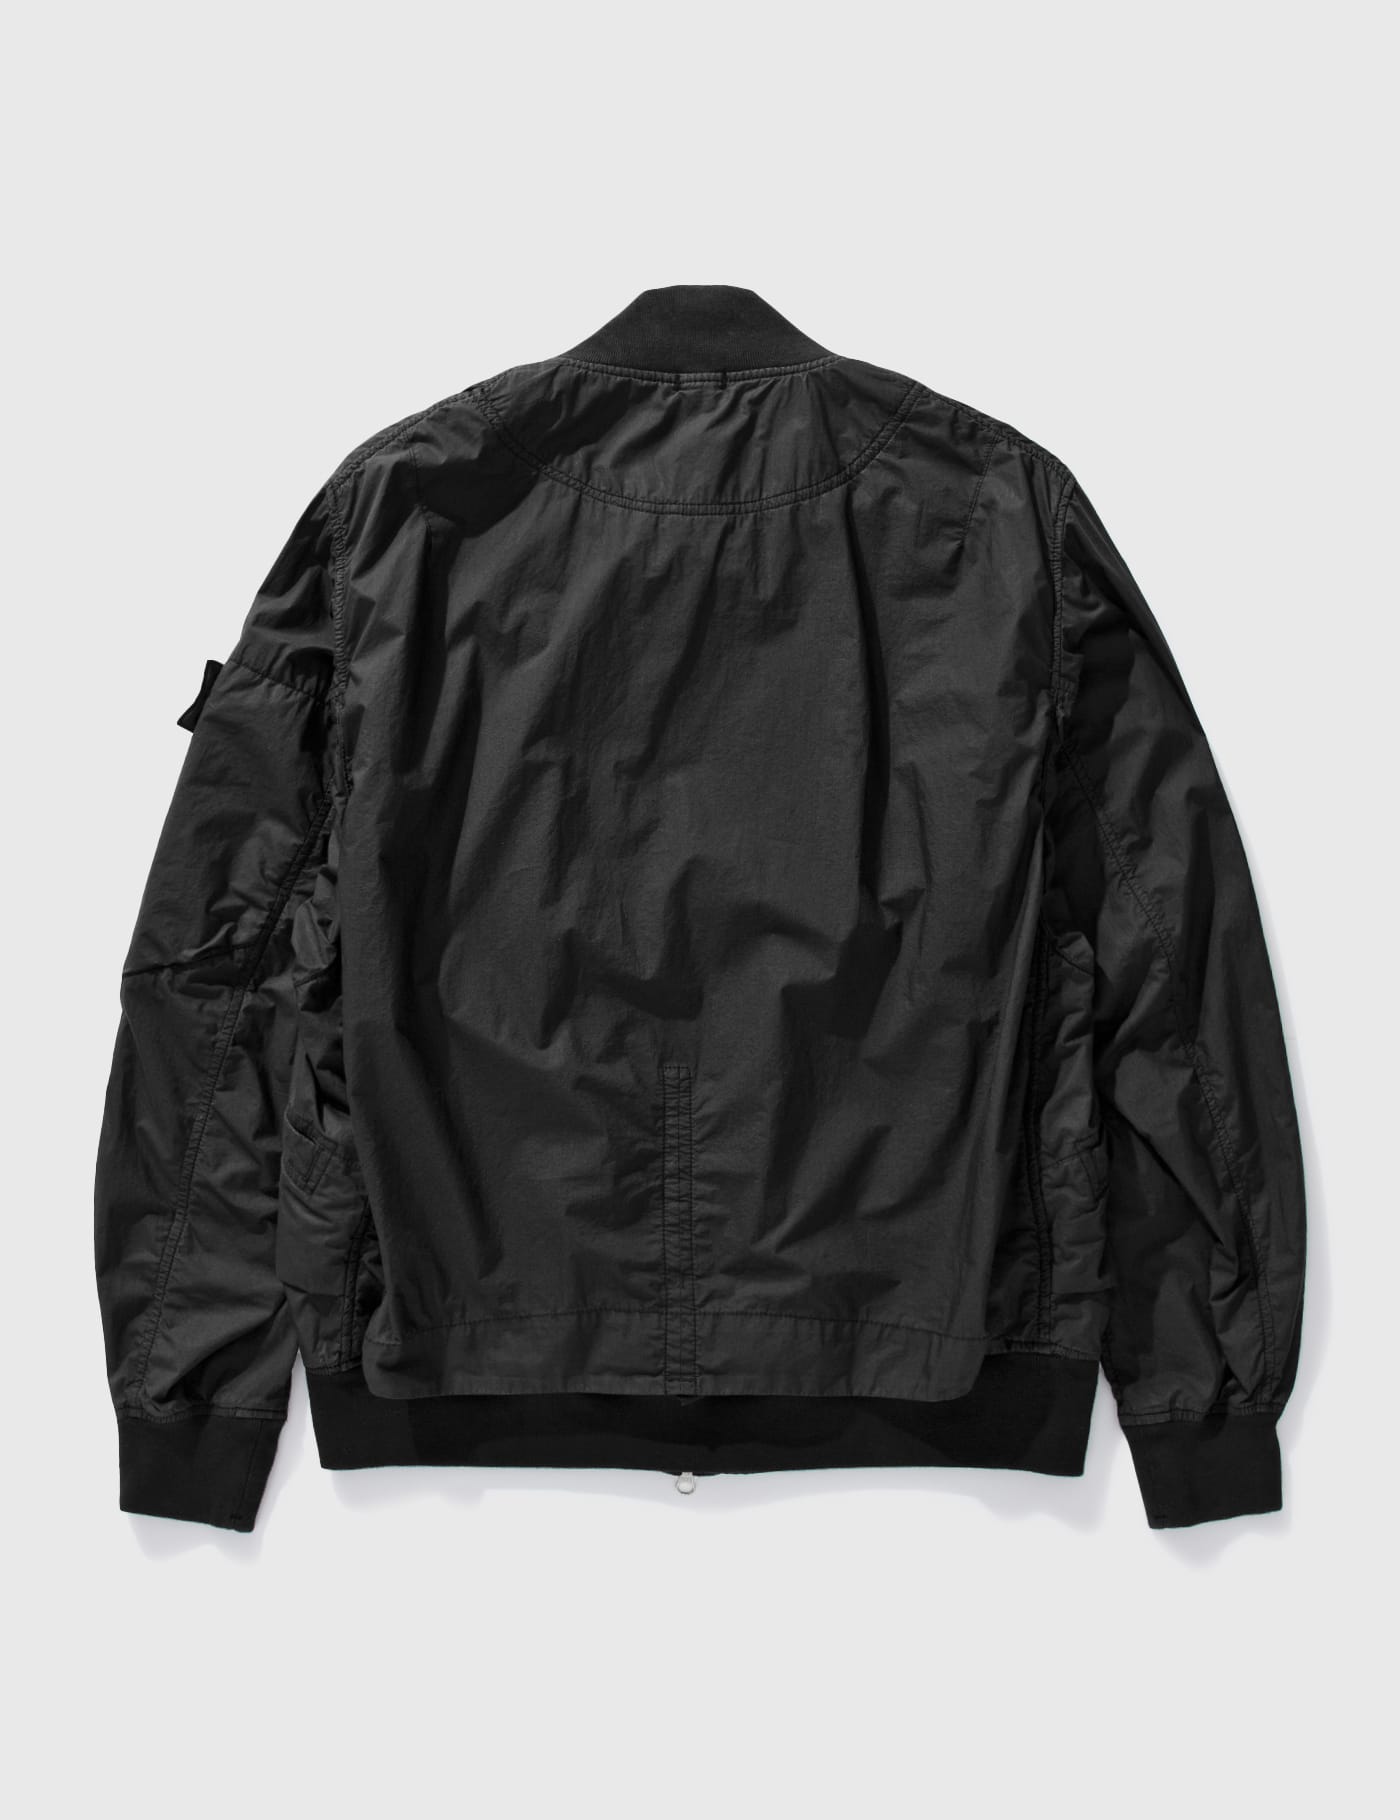 Stone Island Shadow Project - HD Pelleovo Cotton Bomber Jacket | HBX -  Globally Curated Fashion and Lifestyle by Hypebeast